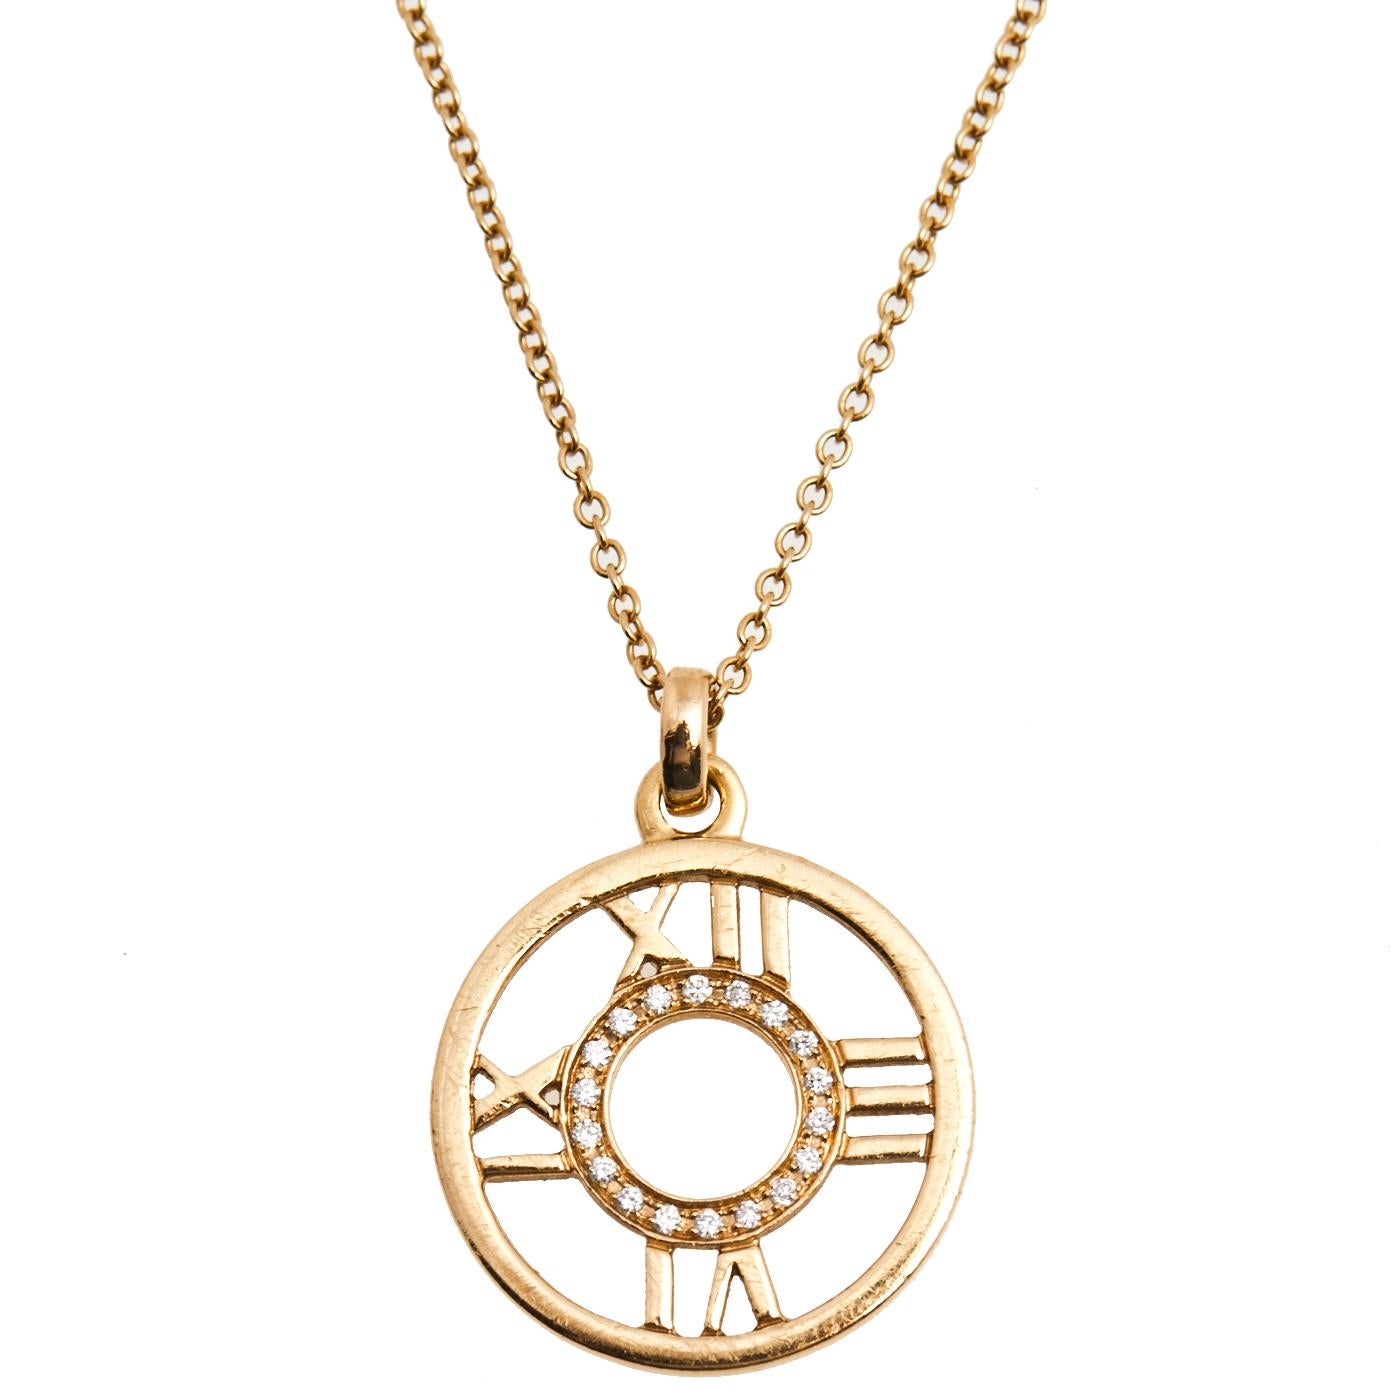 Presenting a beautiful necklace from Tiffany & Co.’s Atlas collection. An 18k yellow gold link chain holds a stunning circular pendant that has signature Roman numerals and sparkling diamonds placed within.

